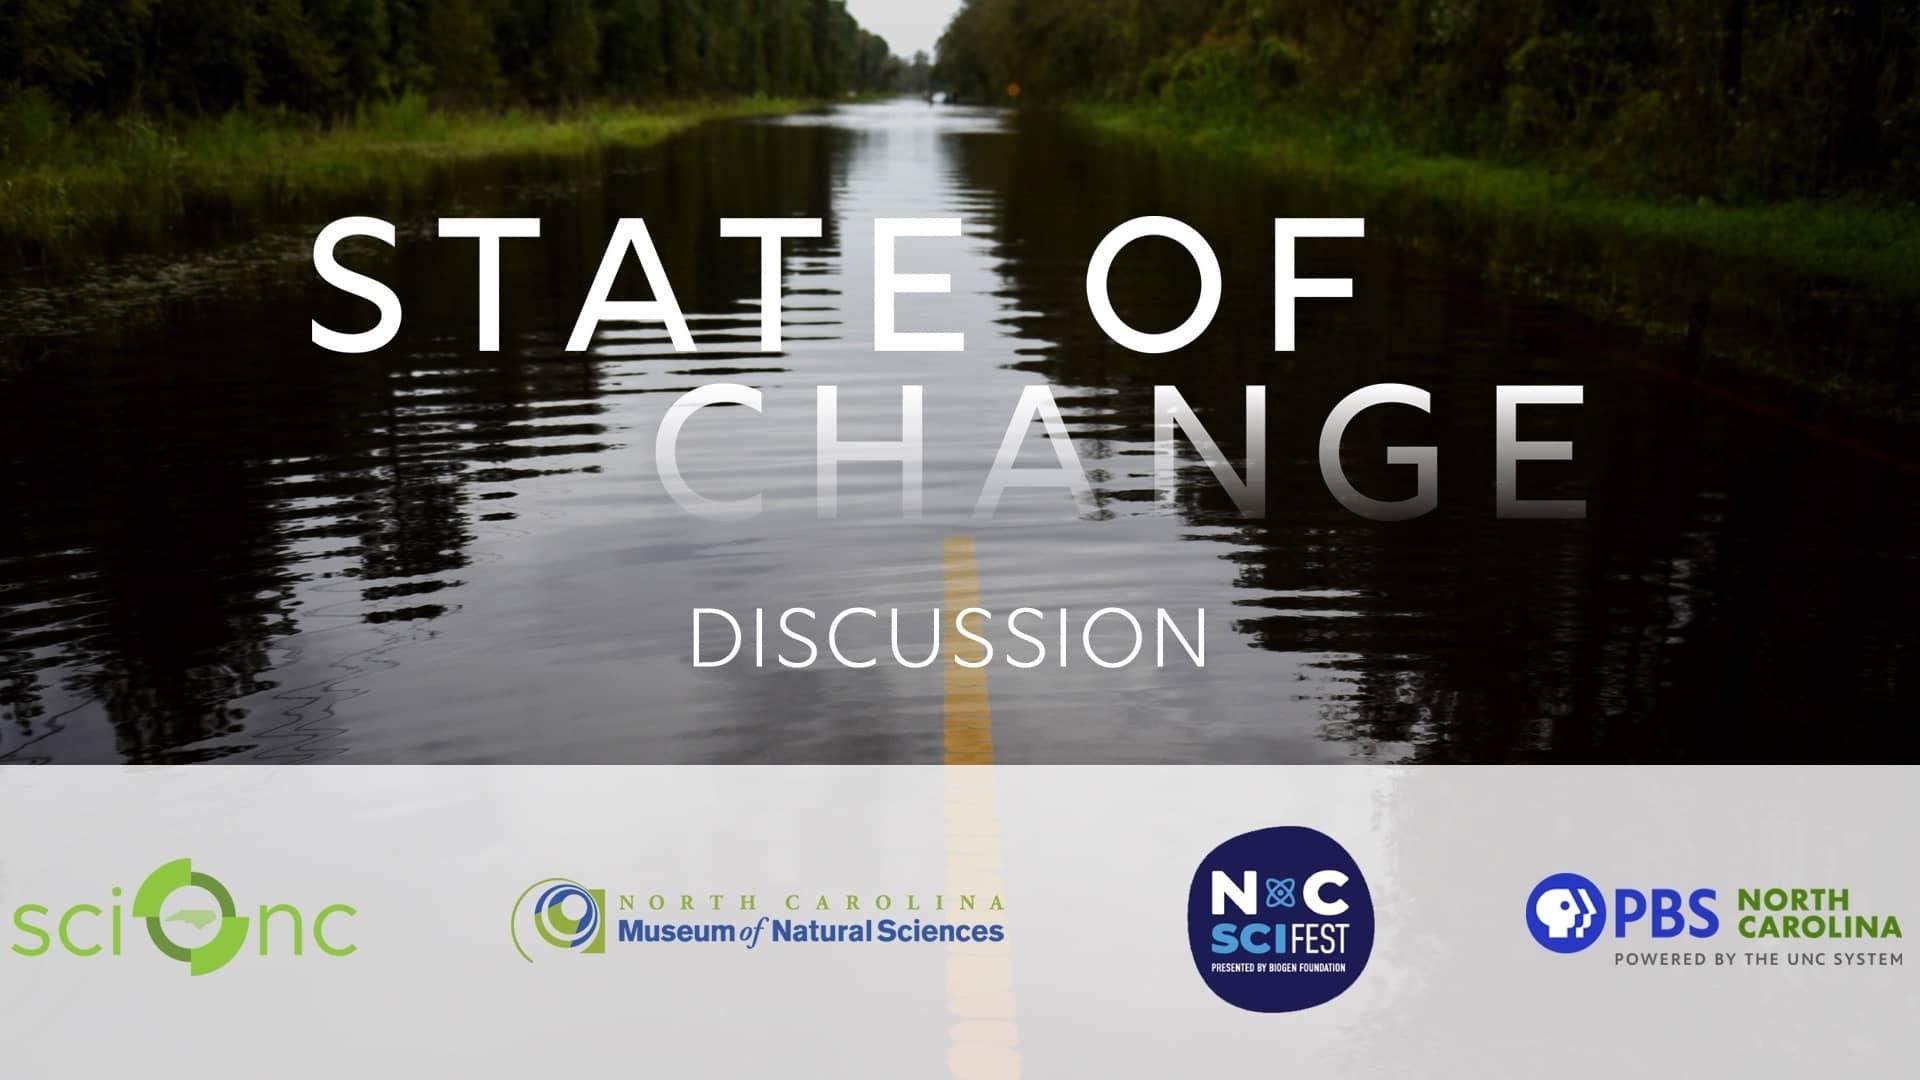 State of Change discussion